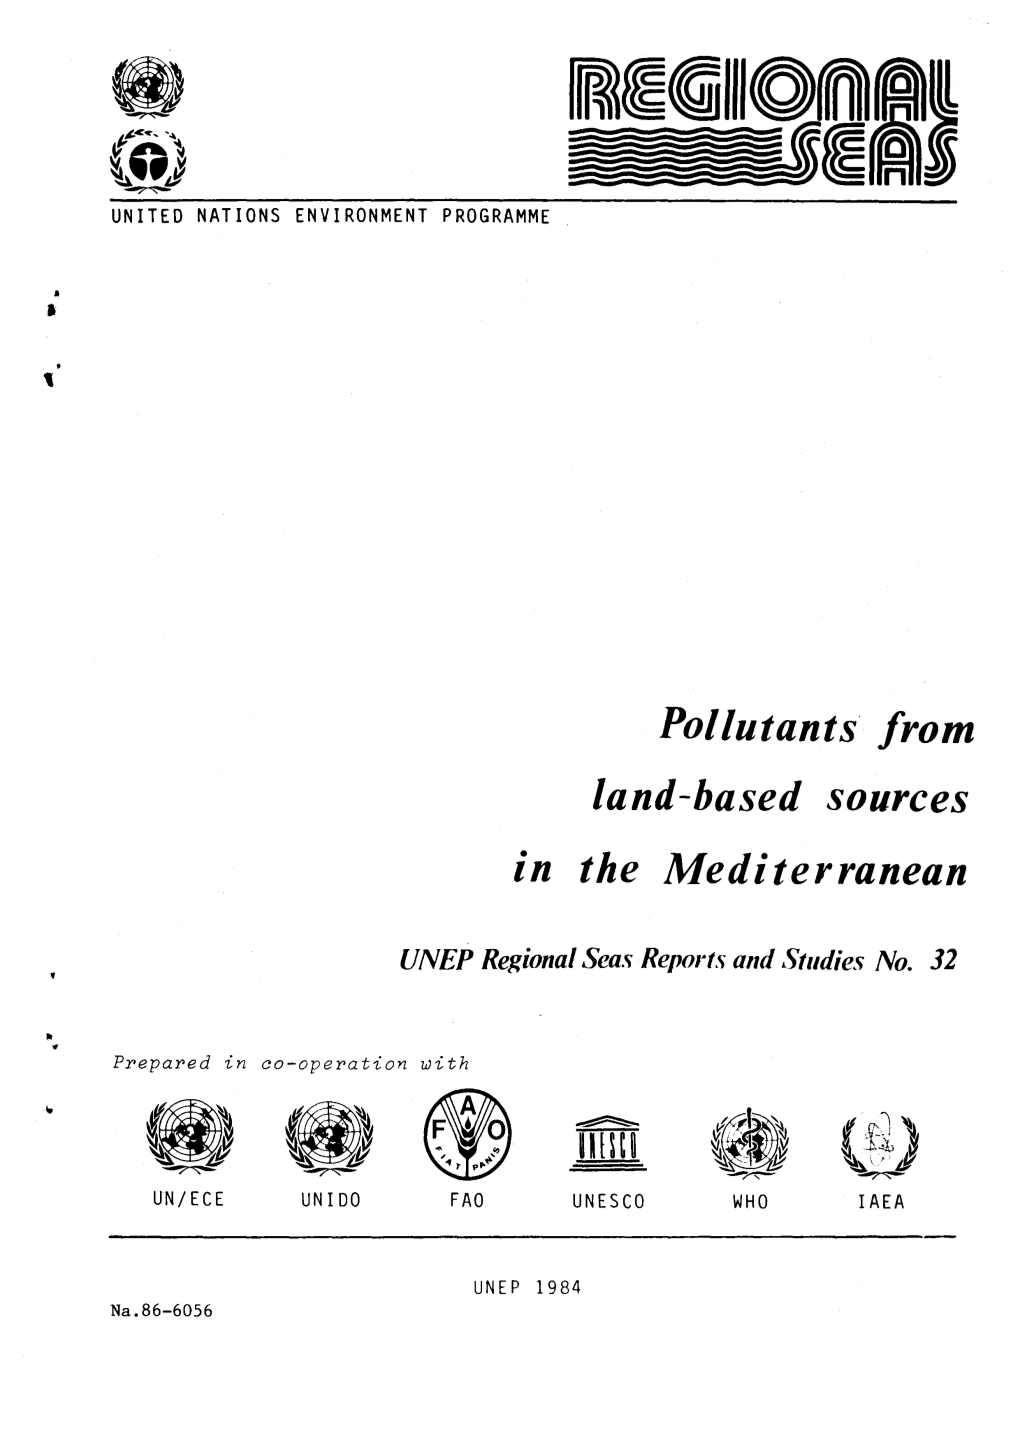 Pollutants from Land-Based Sources in the Mediterranean a (